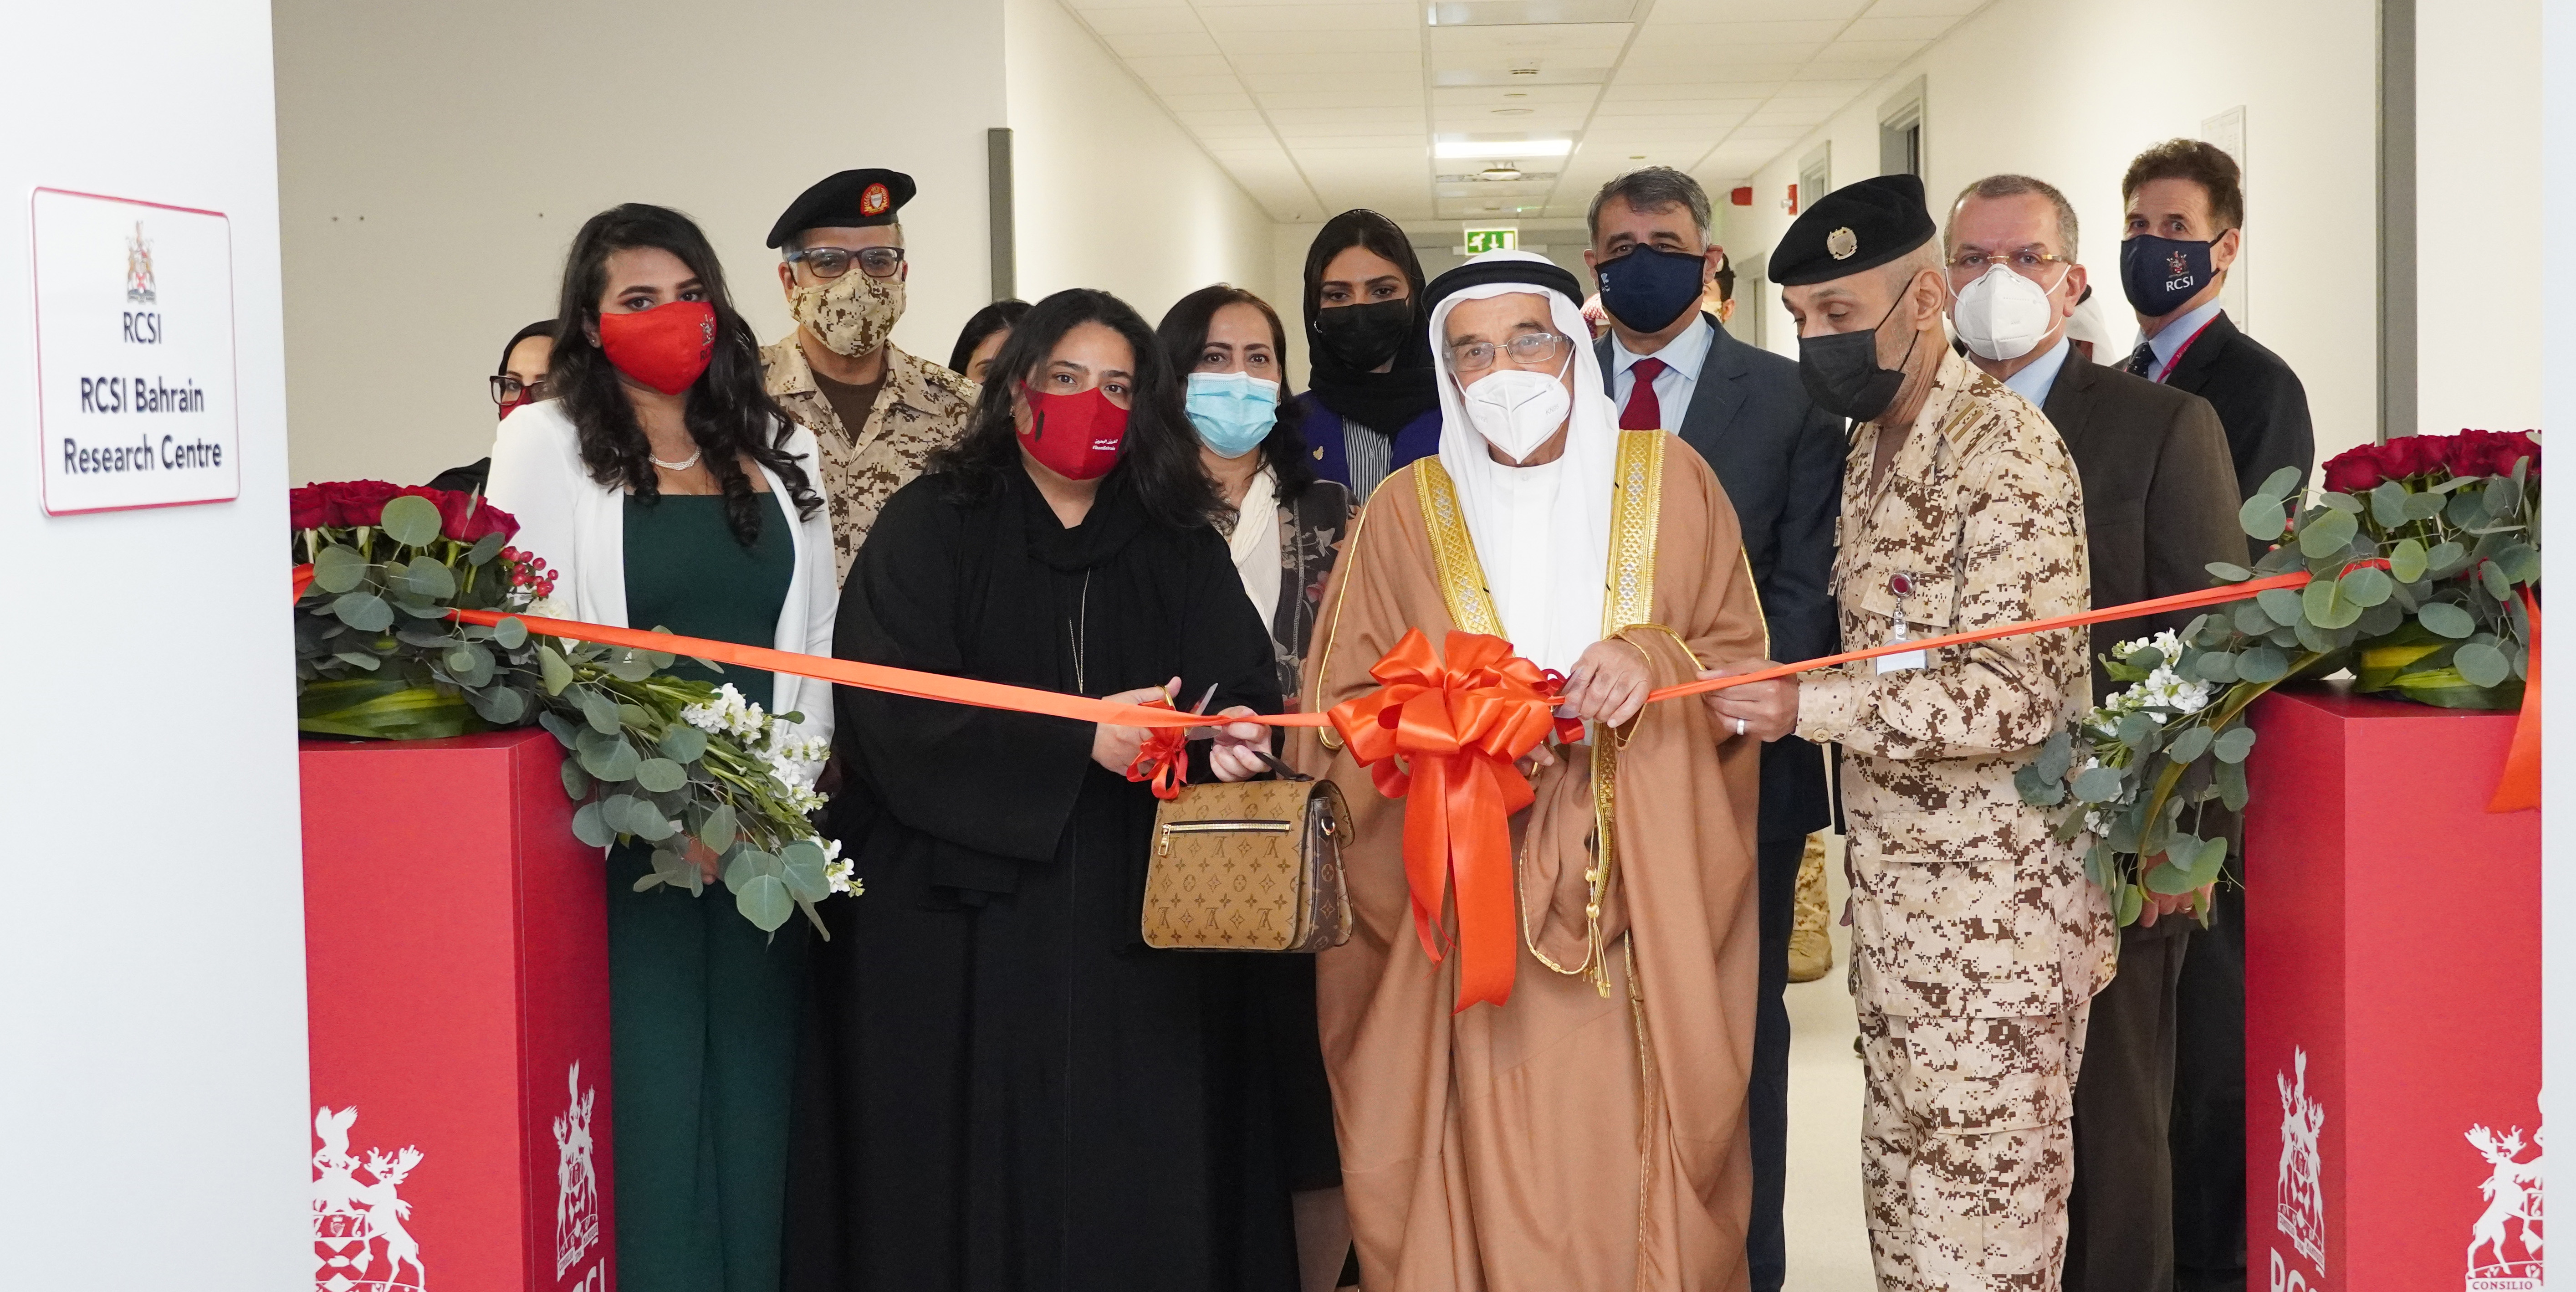 Official Ribbon Cutting by HE Chairman of the Supreme Council of Health & HE Secretary-General of HEC at the RCSI Bahrain Research Centre